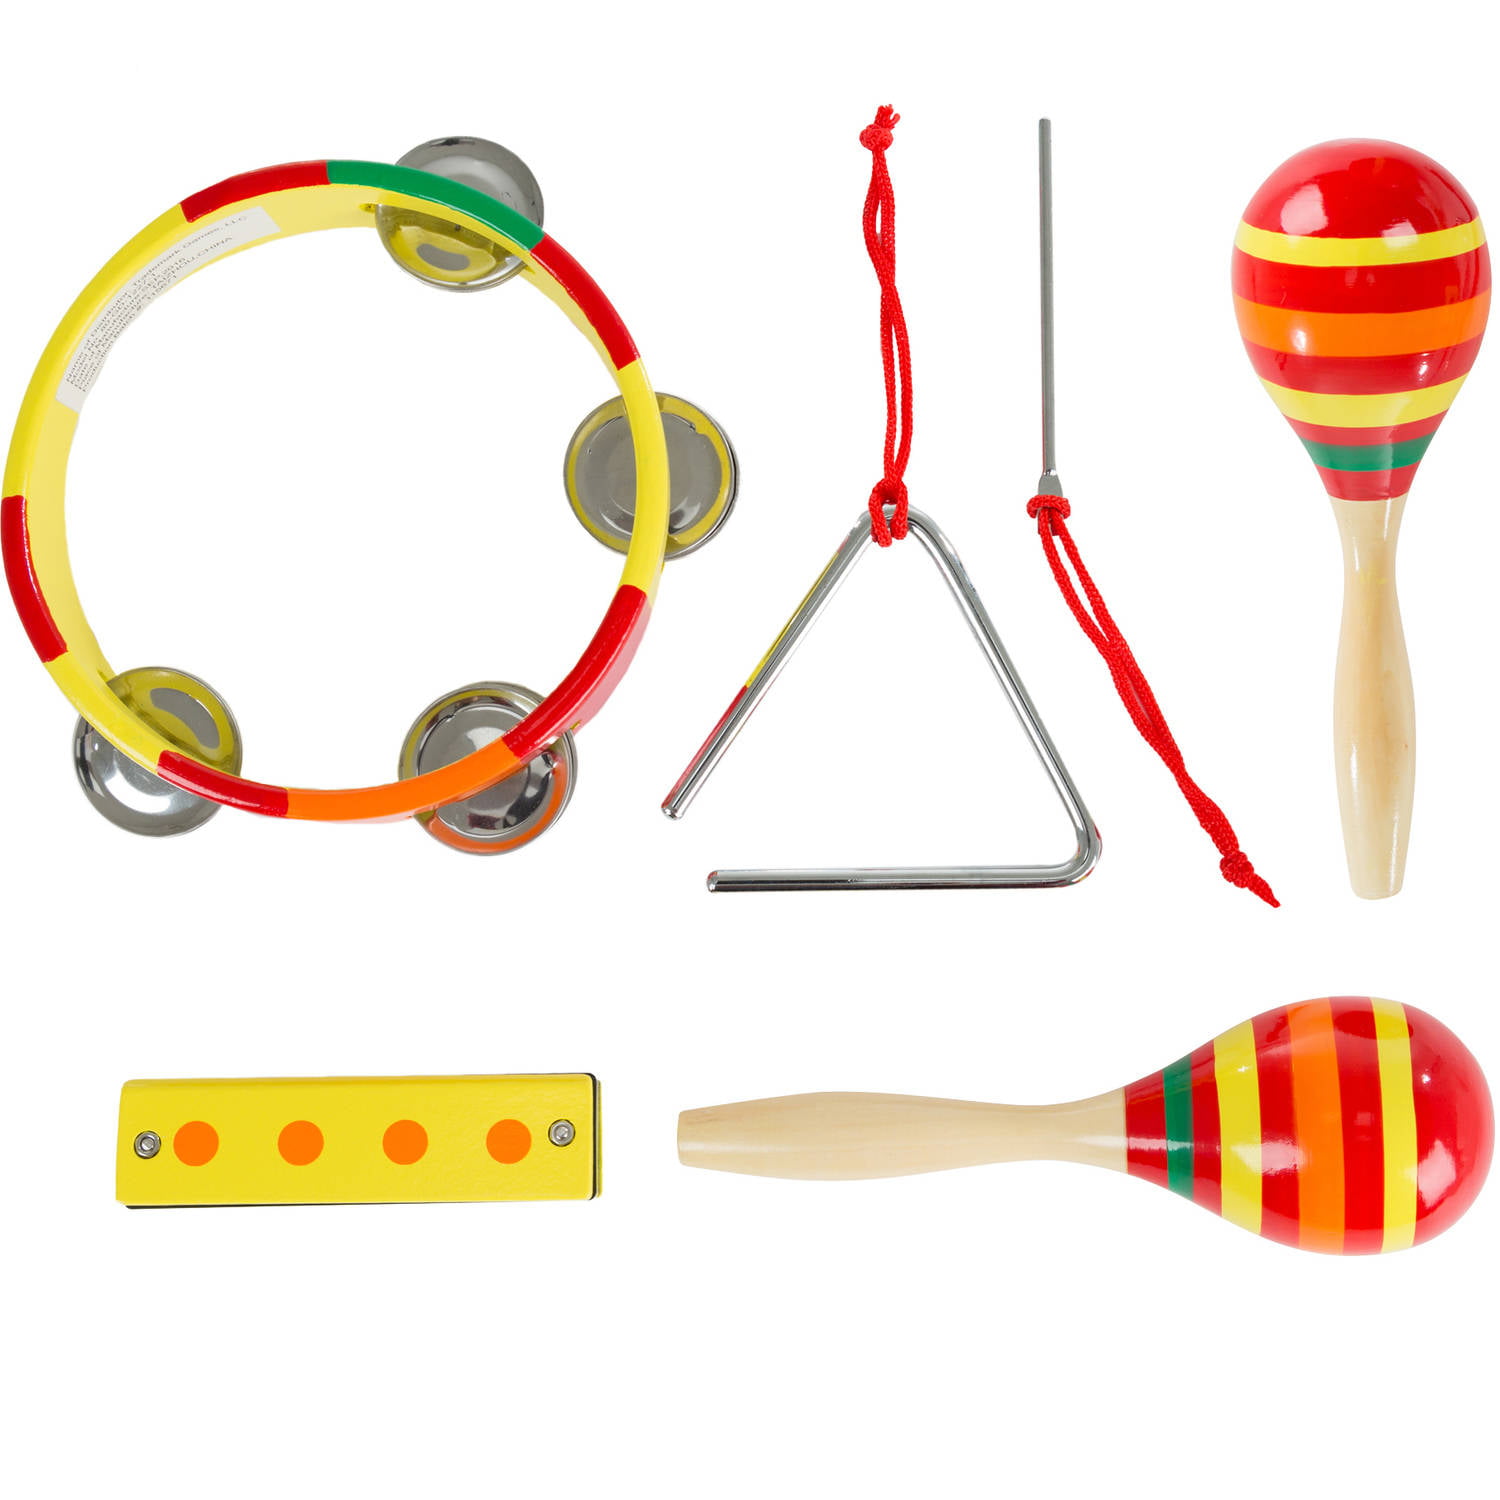 Wood Kids Percussion Musical Instruments Toy Children Gift Educational Toys S 